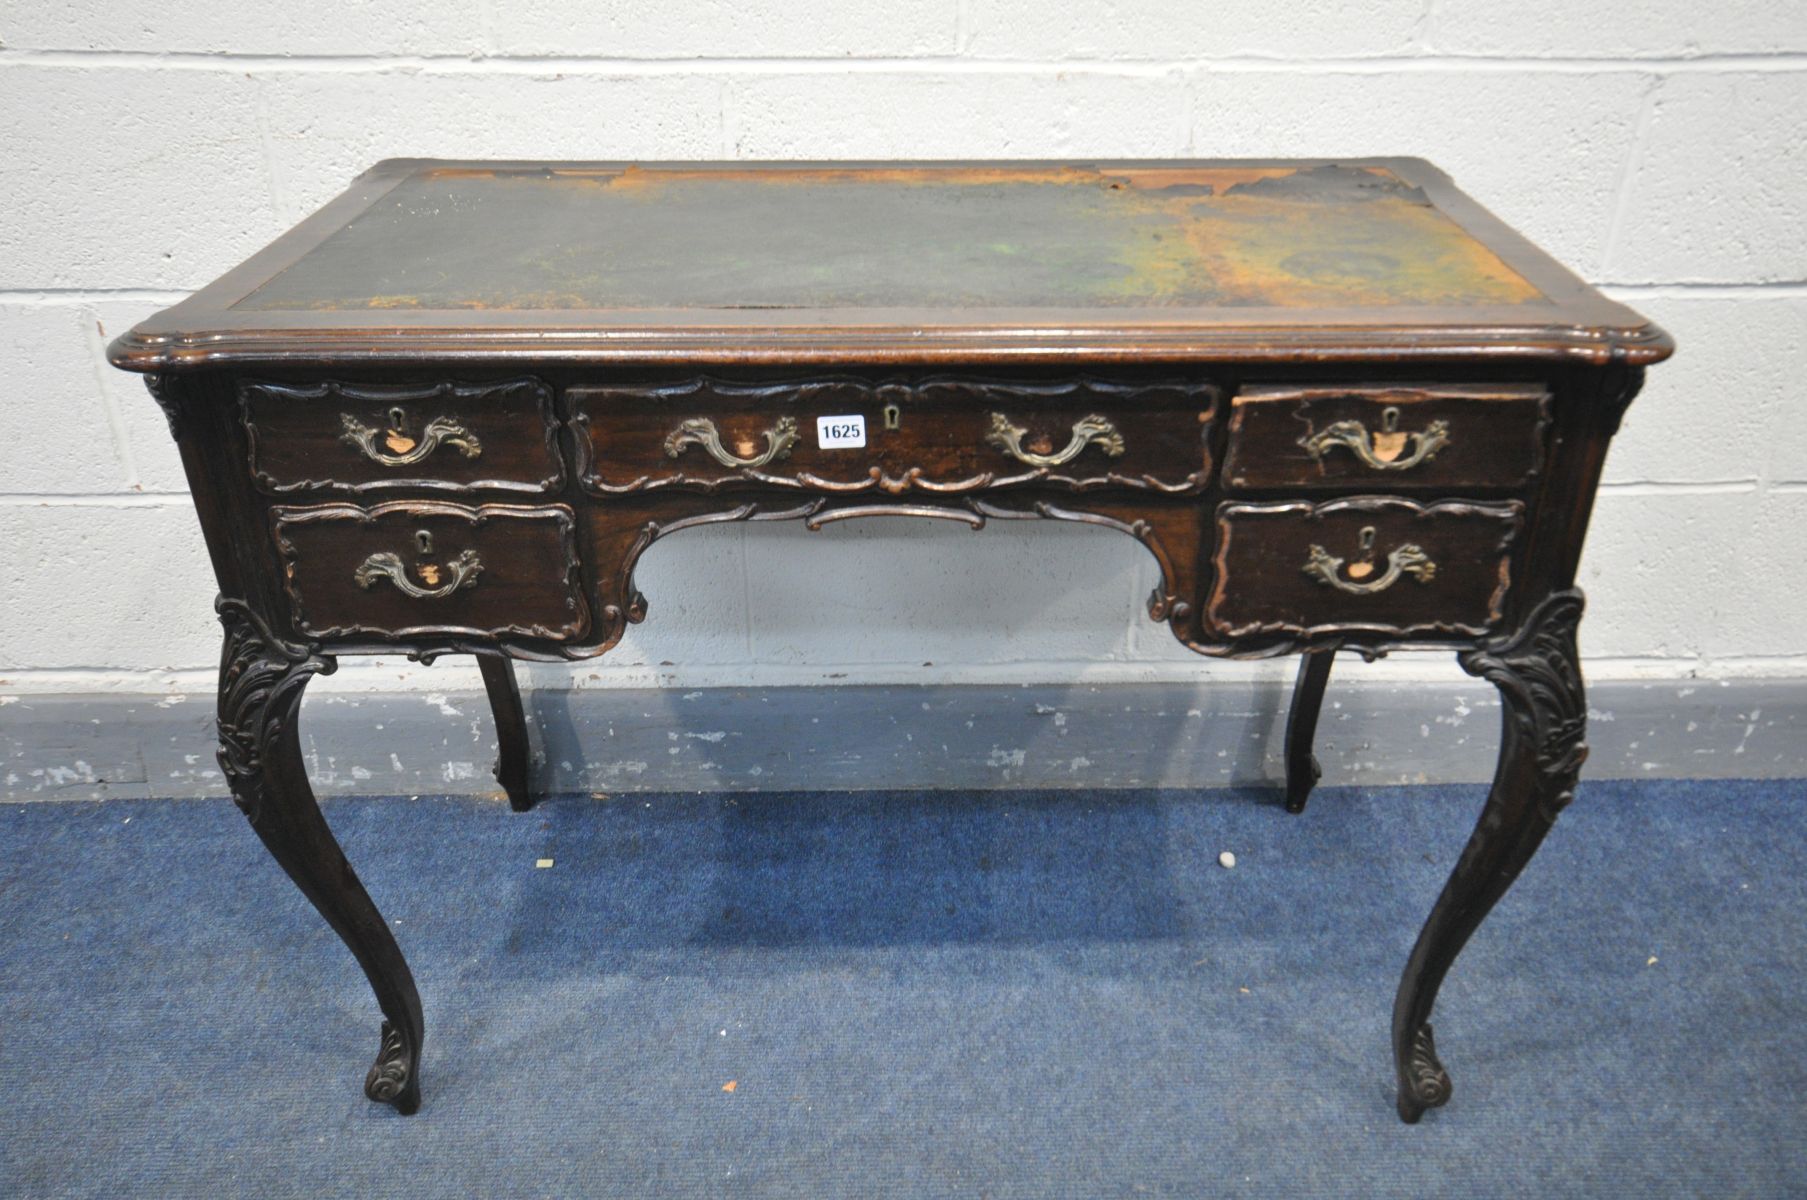 AN EARLY 20TH CENTURY FRENCH STYLE MAHOGANY LADIES DESK, with a distressed blue leather top, an